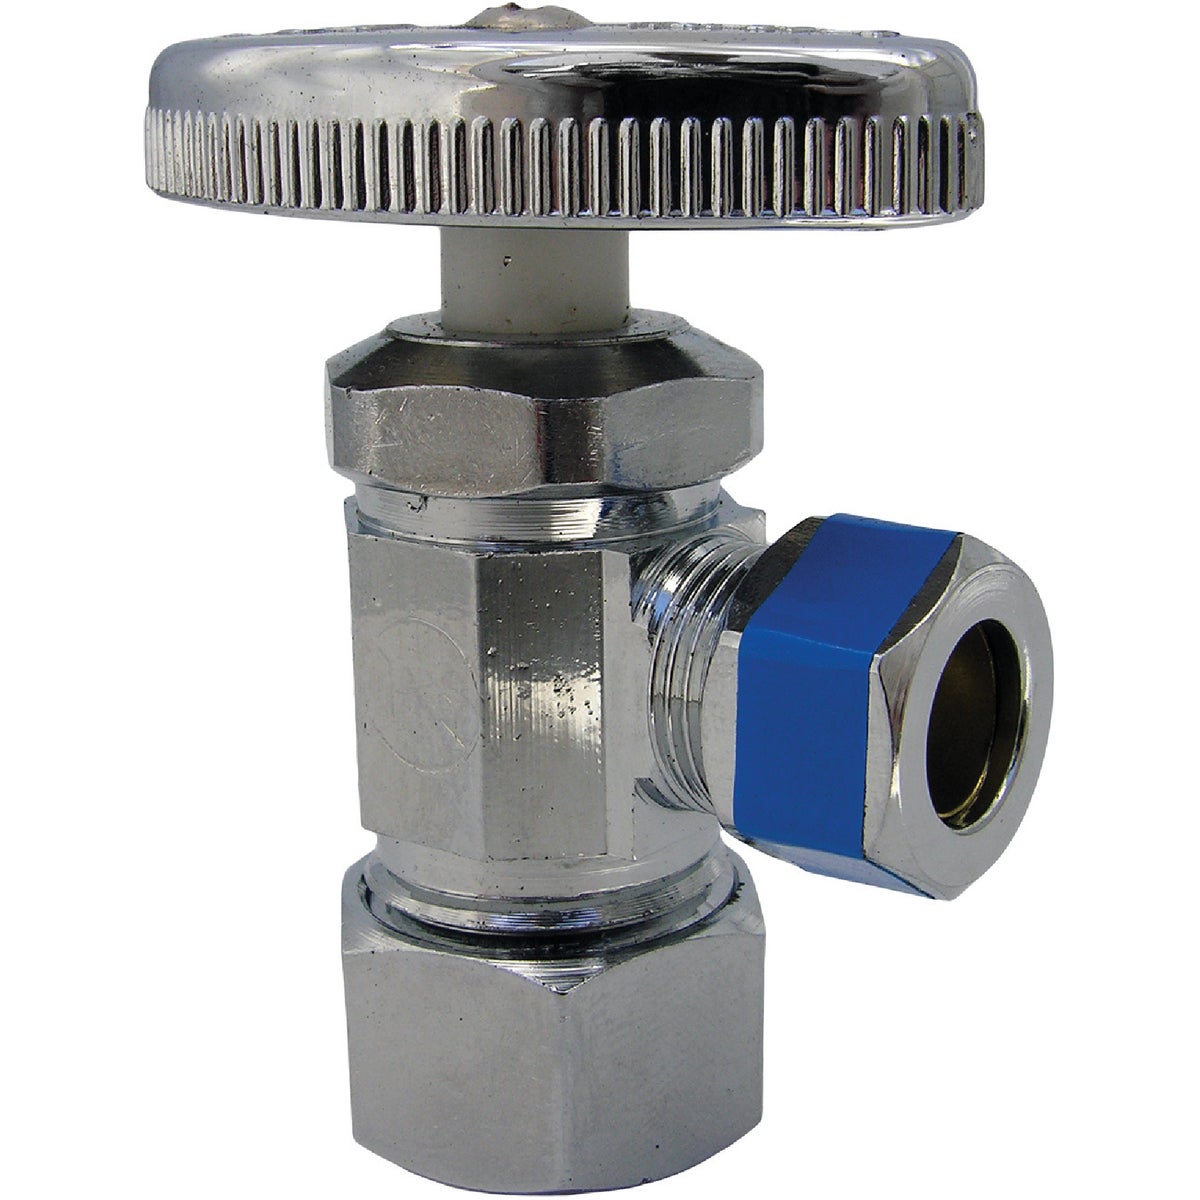 Lasco 5/8 In. CTComp Inlet x 3/8 In. Comp Outlet Multi Turn Style Angle Valve